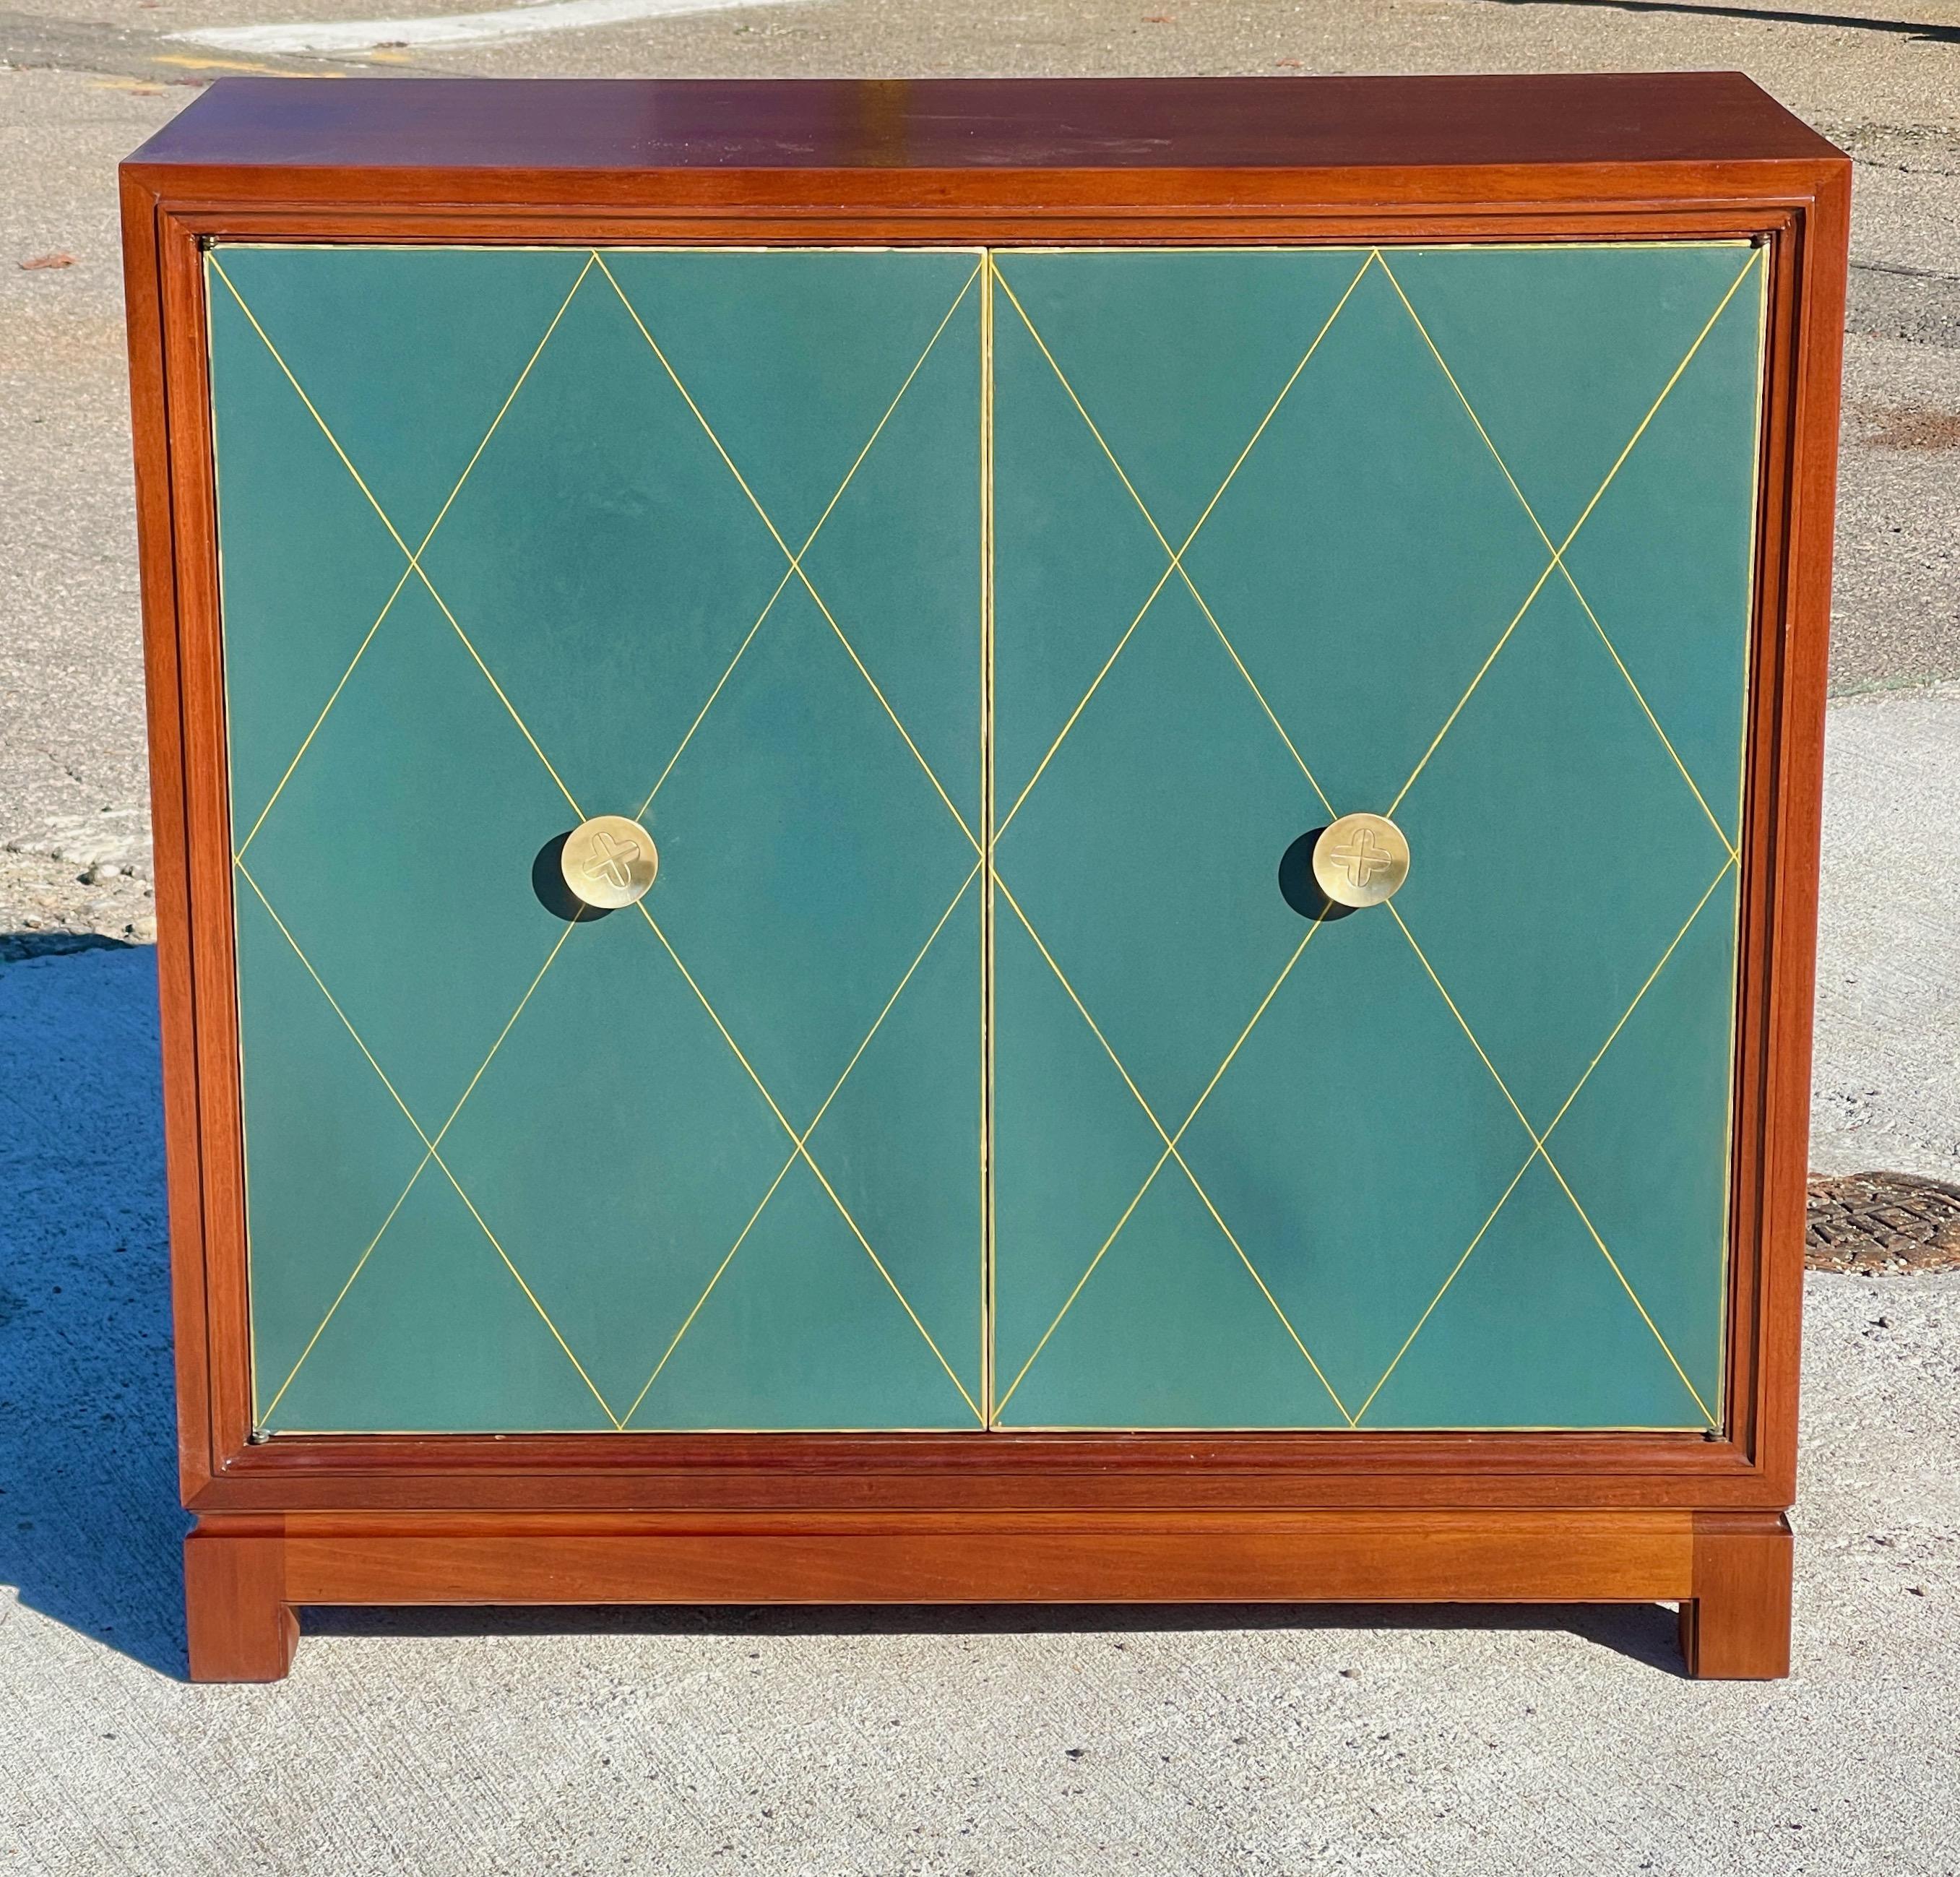 Classic mahogany cabinet with tooled and gilt diamond pattern green leather door panels and distinctive polished brass door pulls. 
Features a single adjustable interior shelf. 
Designed by Tommi Parzinger and produced by Charak Modern in 1953.